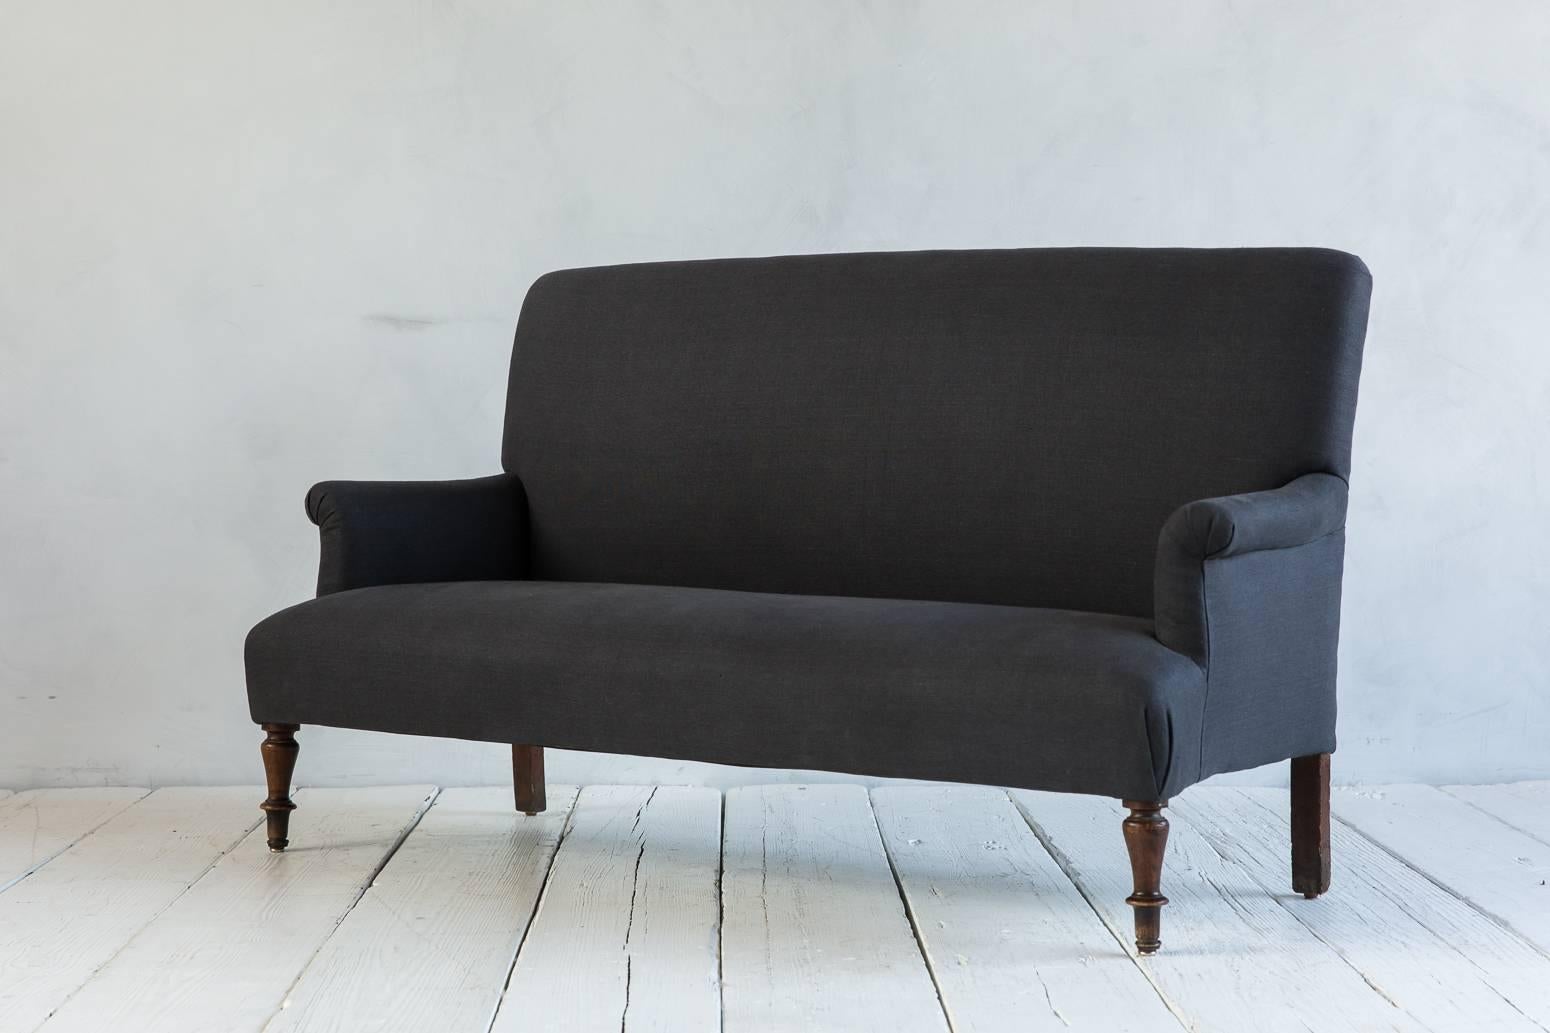 Mid-20th Century Vintage Settee with Turned Legs Newly Upholstered in Graphite Linen